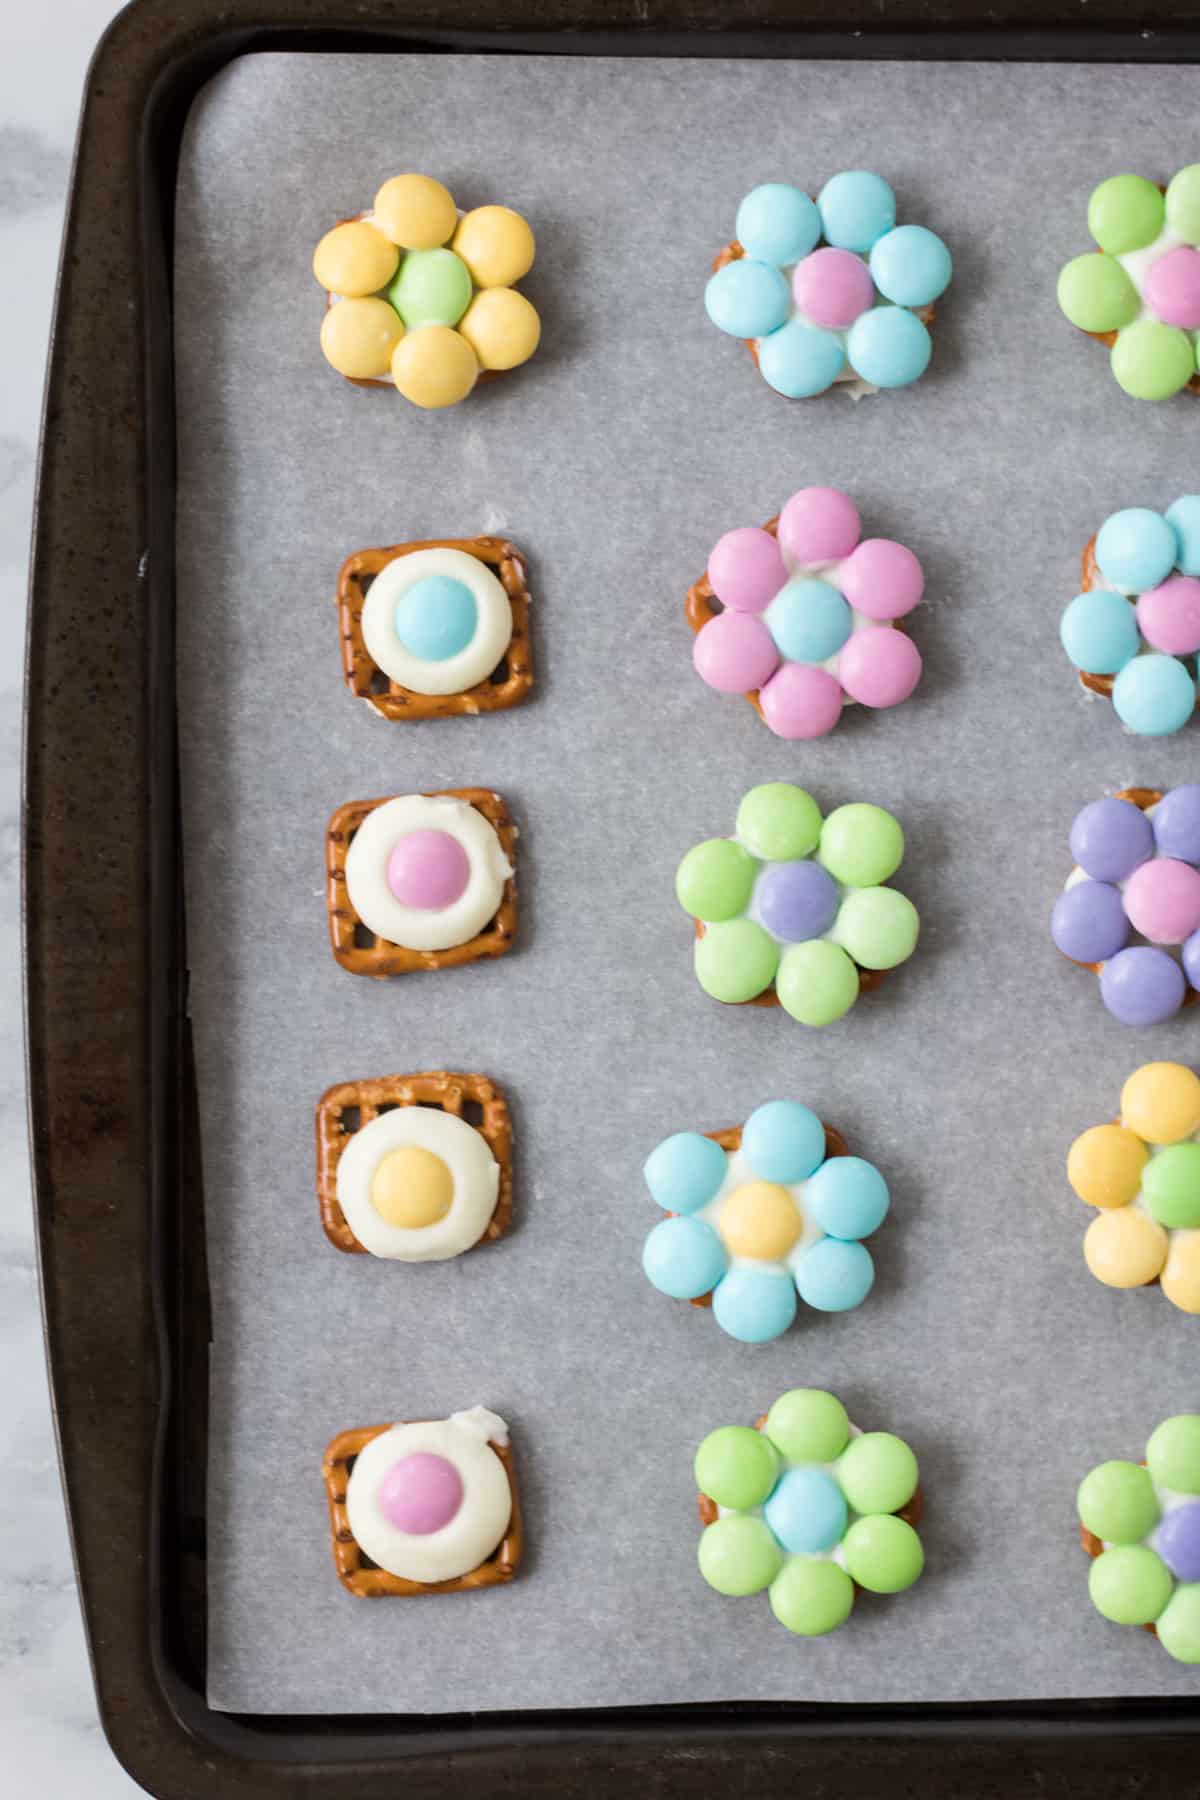 Flower pretzel bites completed and in progress. The in progress bites have an M&M in the center of each but do not yet have their "petals"